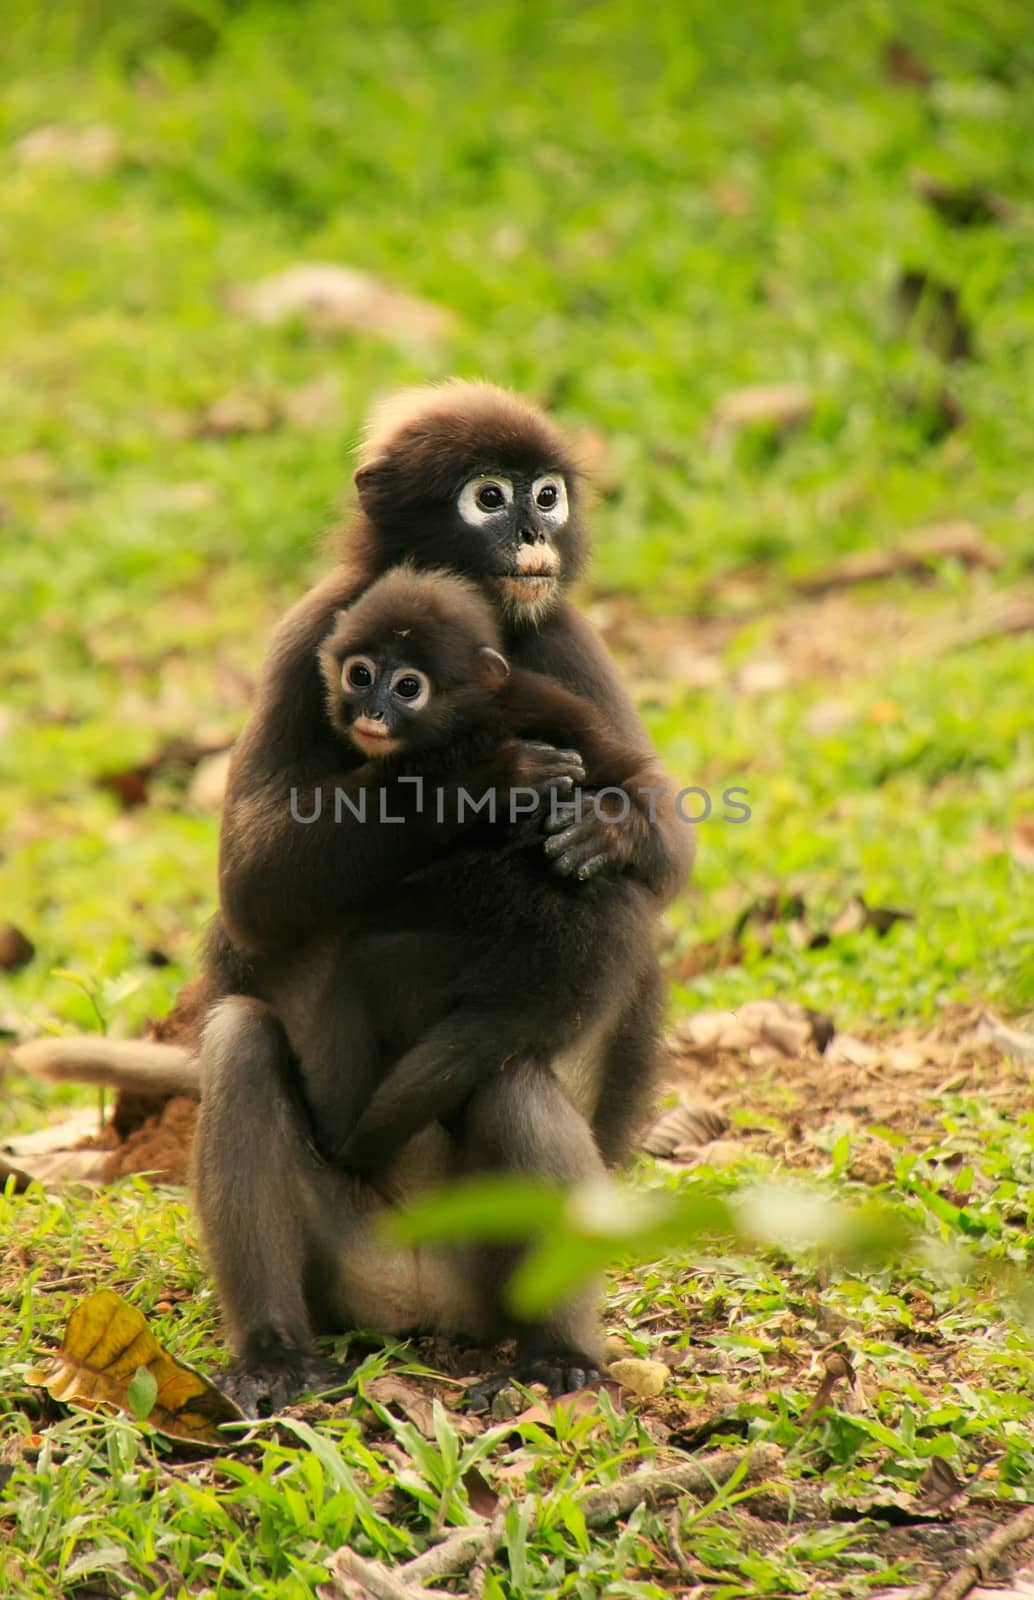 Spectacled langur sitting with a baby, Ang Thong National Marine by donya_nedomam